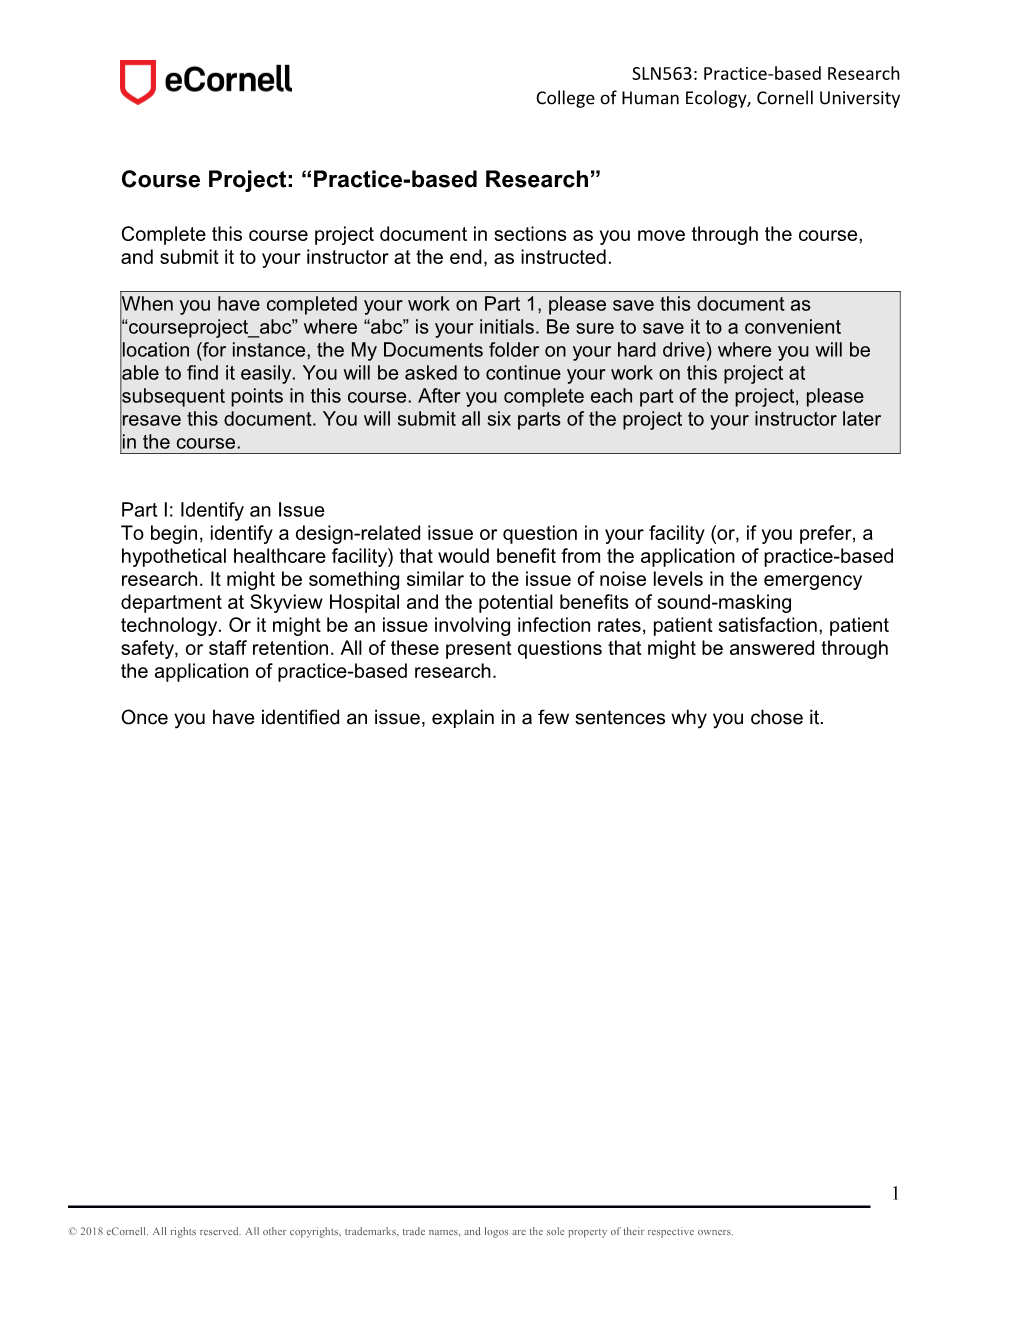 Course Project: Practice-Based Research